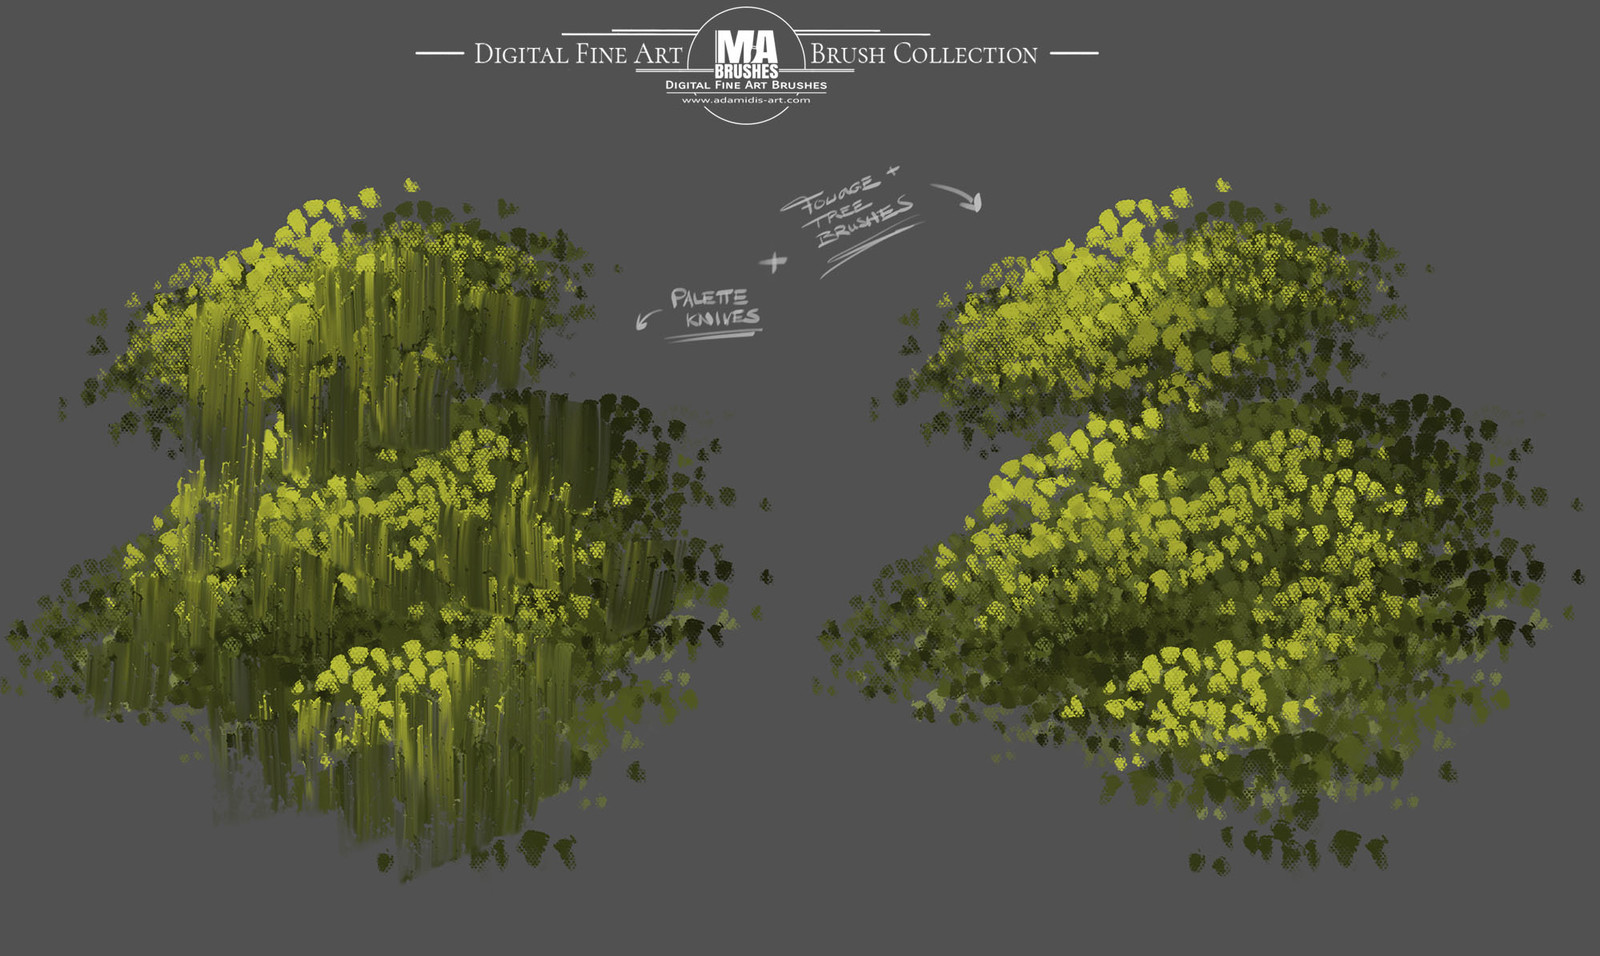 Perfect and realistic Foliage/Tree/Leave Brushes included in the MA-Brush Pack!